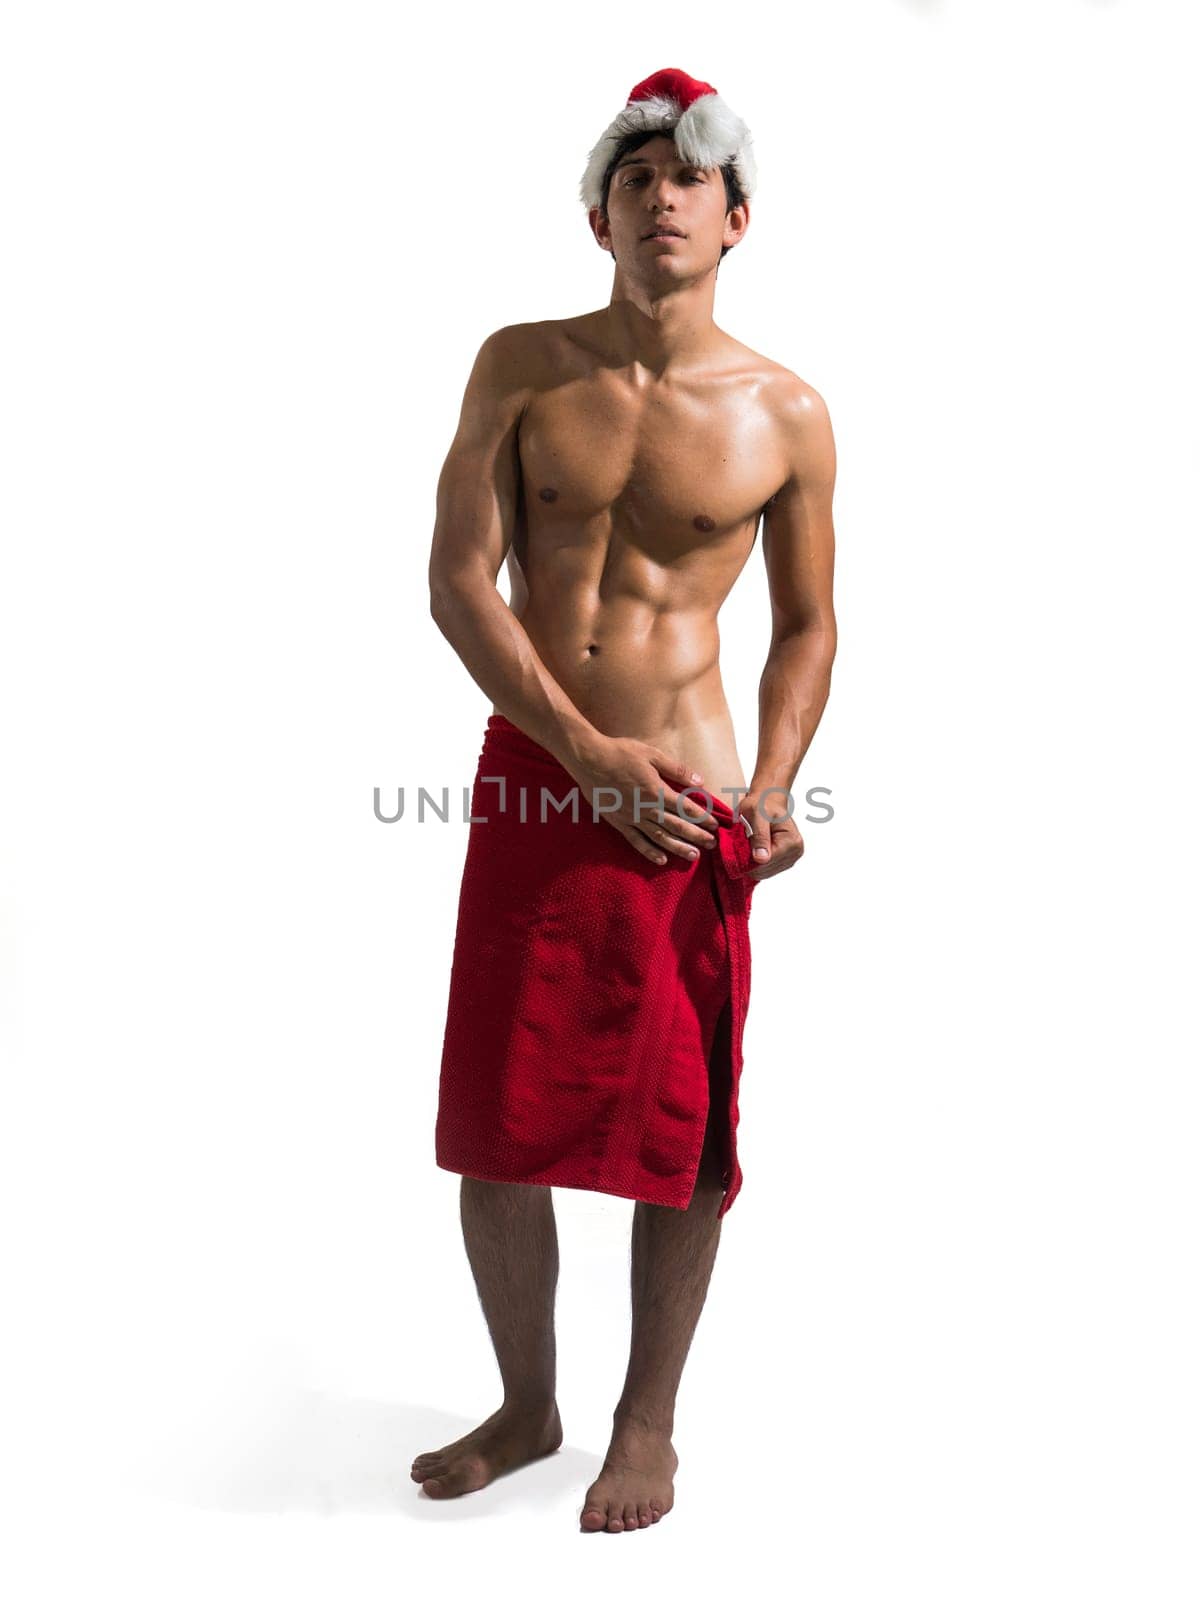 Naked Young Attractive Fit Man Posing in Studio with White Background Covering Groin Area with Towel, Wearing Santa Claus Hat and Looking at Camera Smiling. Full figure shot